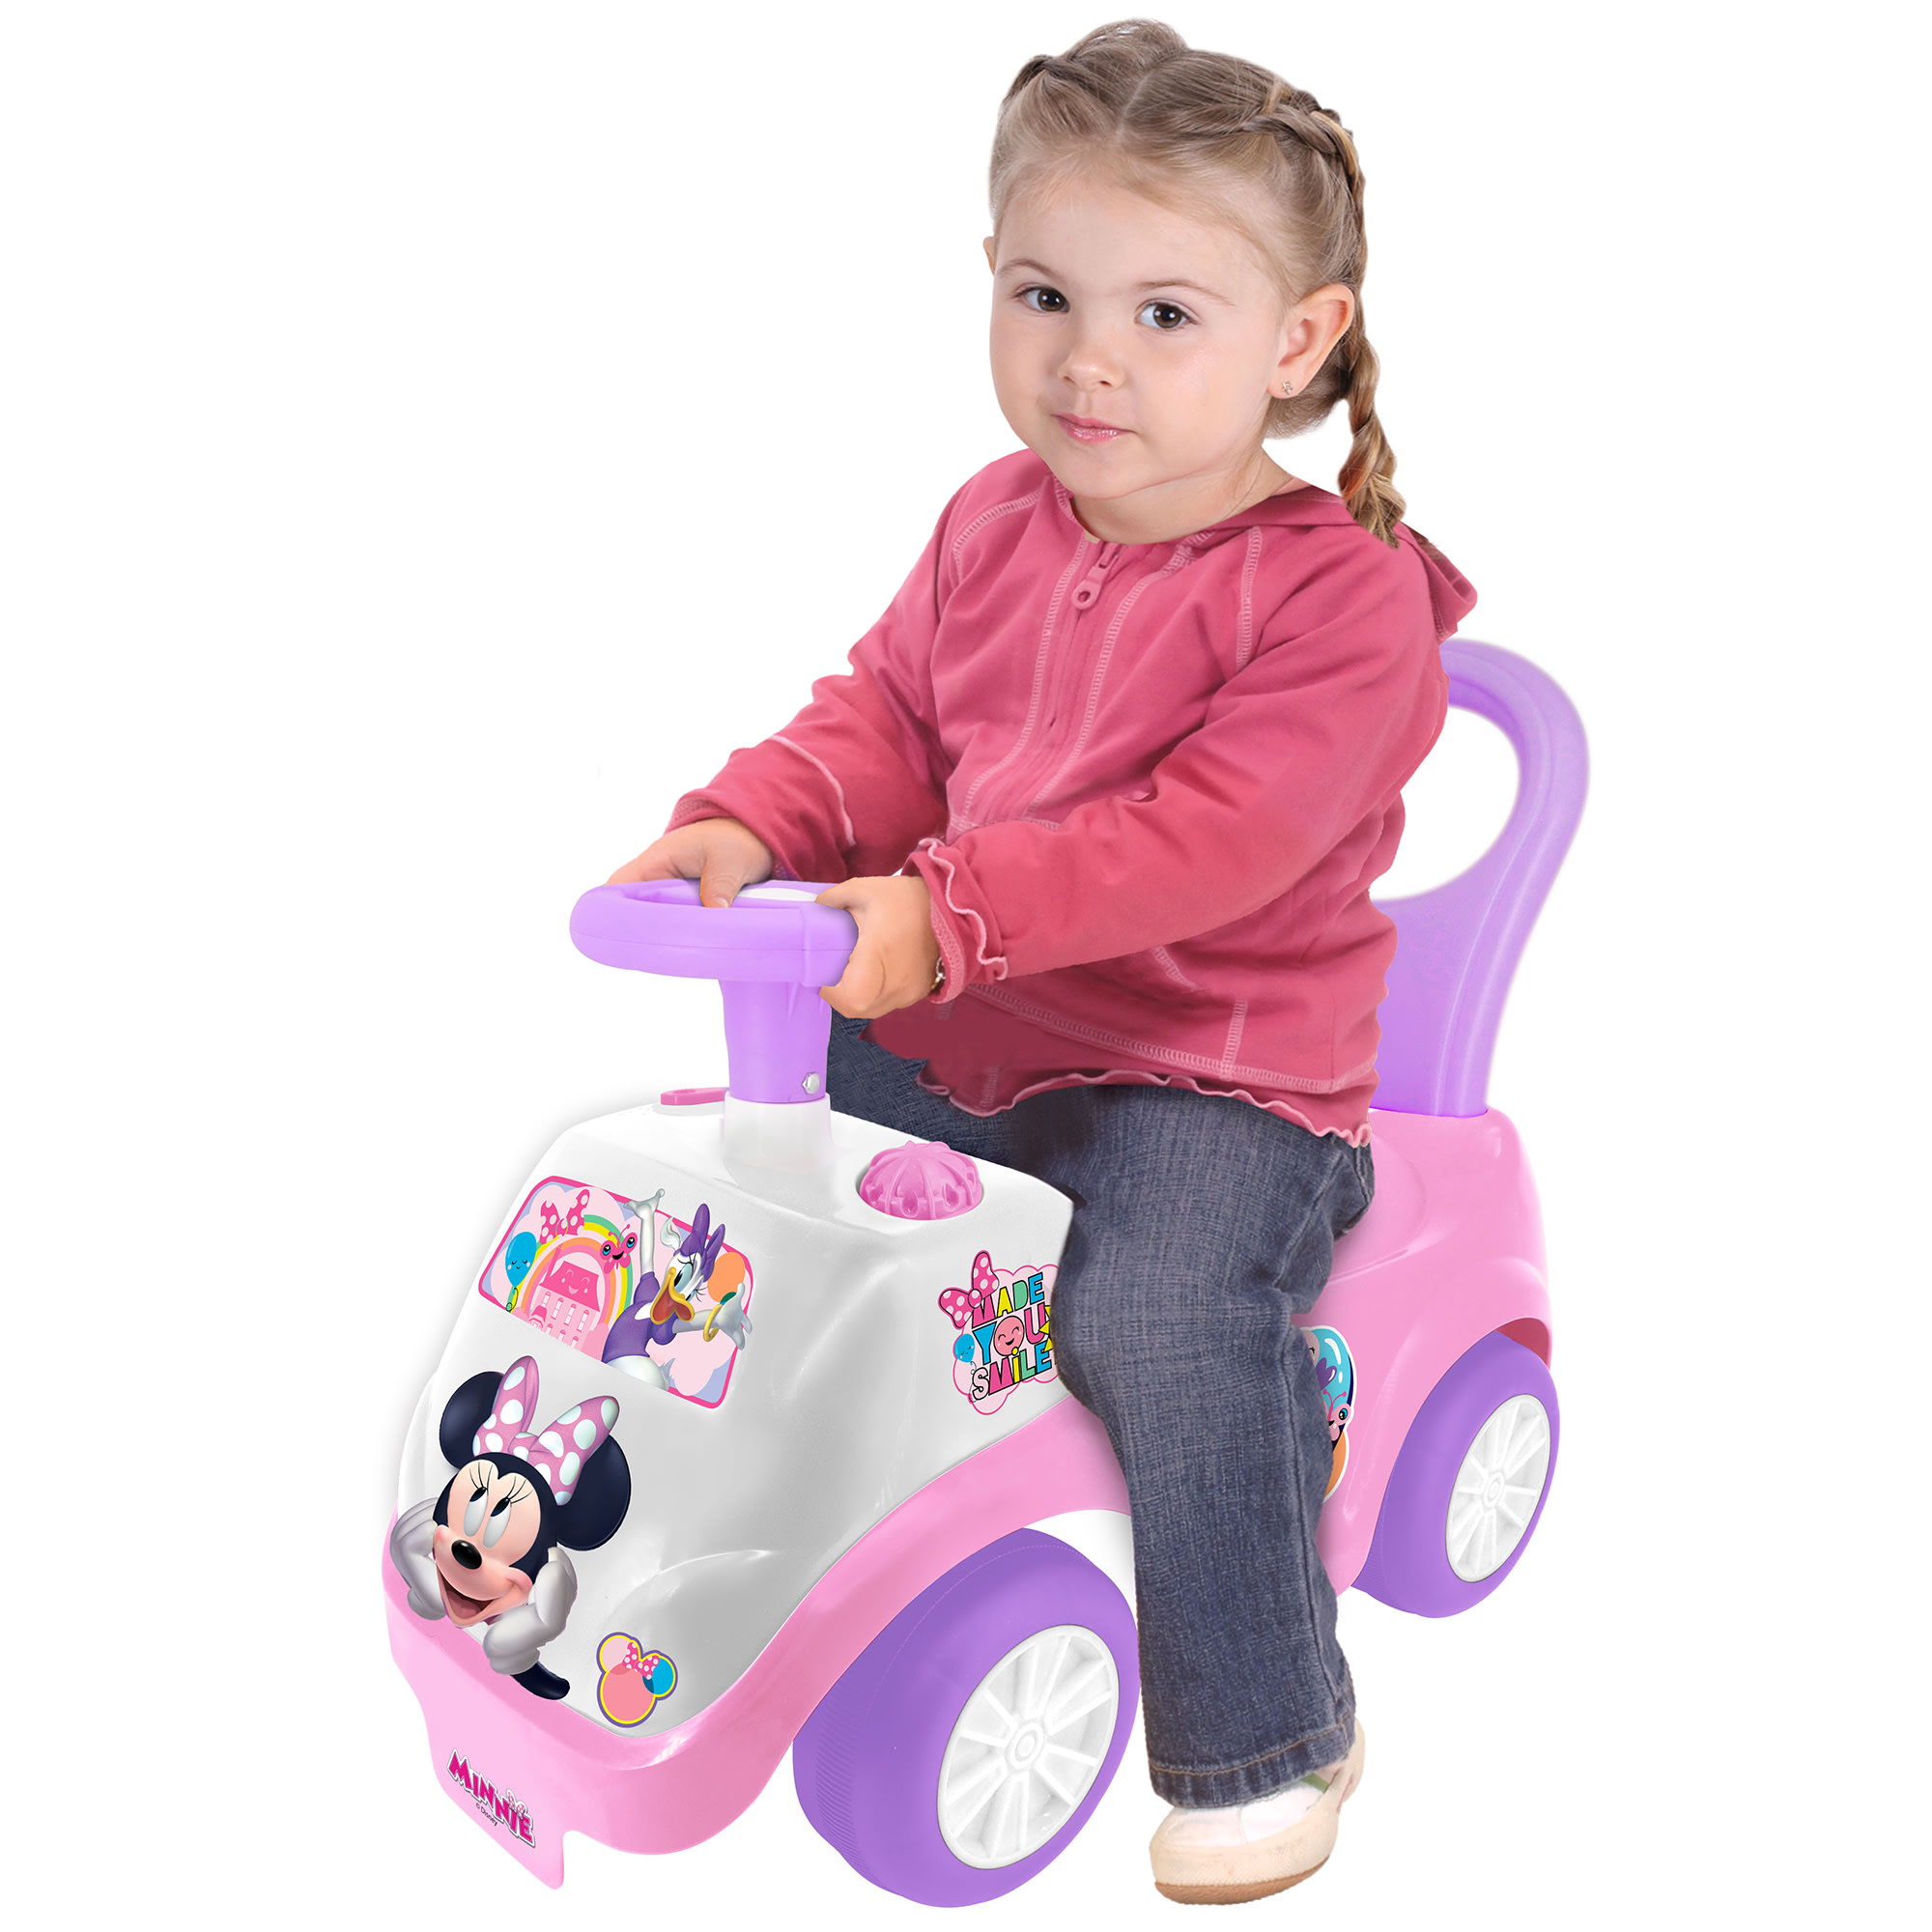 Kiddieland Disney Lights 'N' Sounds Ride-On: Minnie Mouse Kids Interactive Push Toy Car, Foot To Floor, Toddlers, Ages 12-36 Months - image 5 of 5